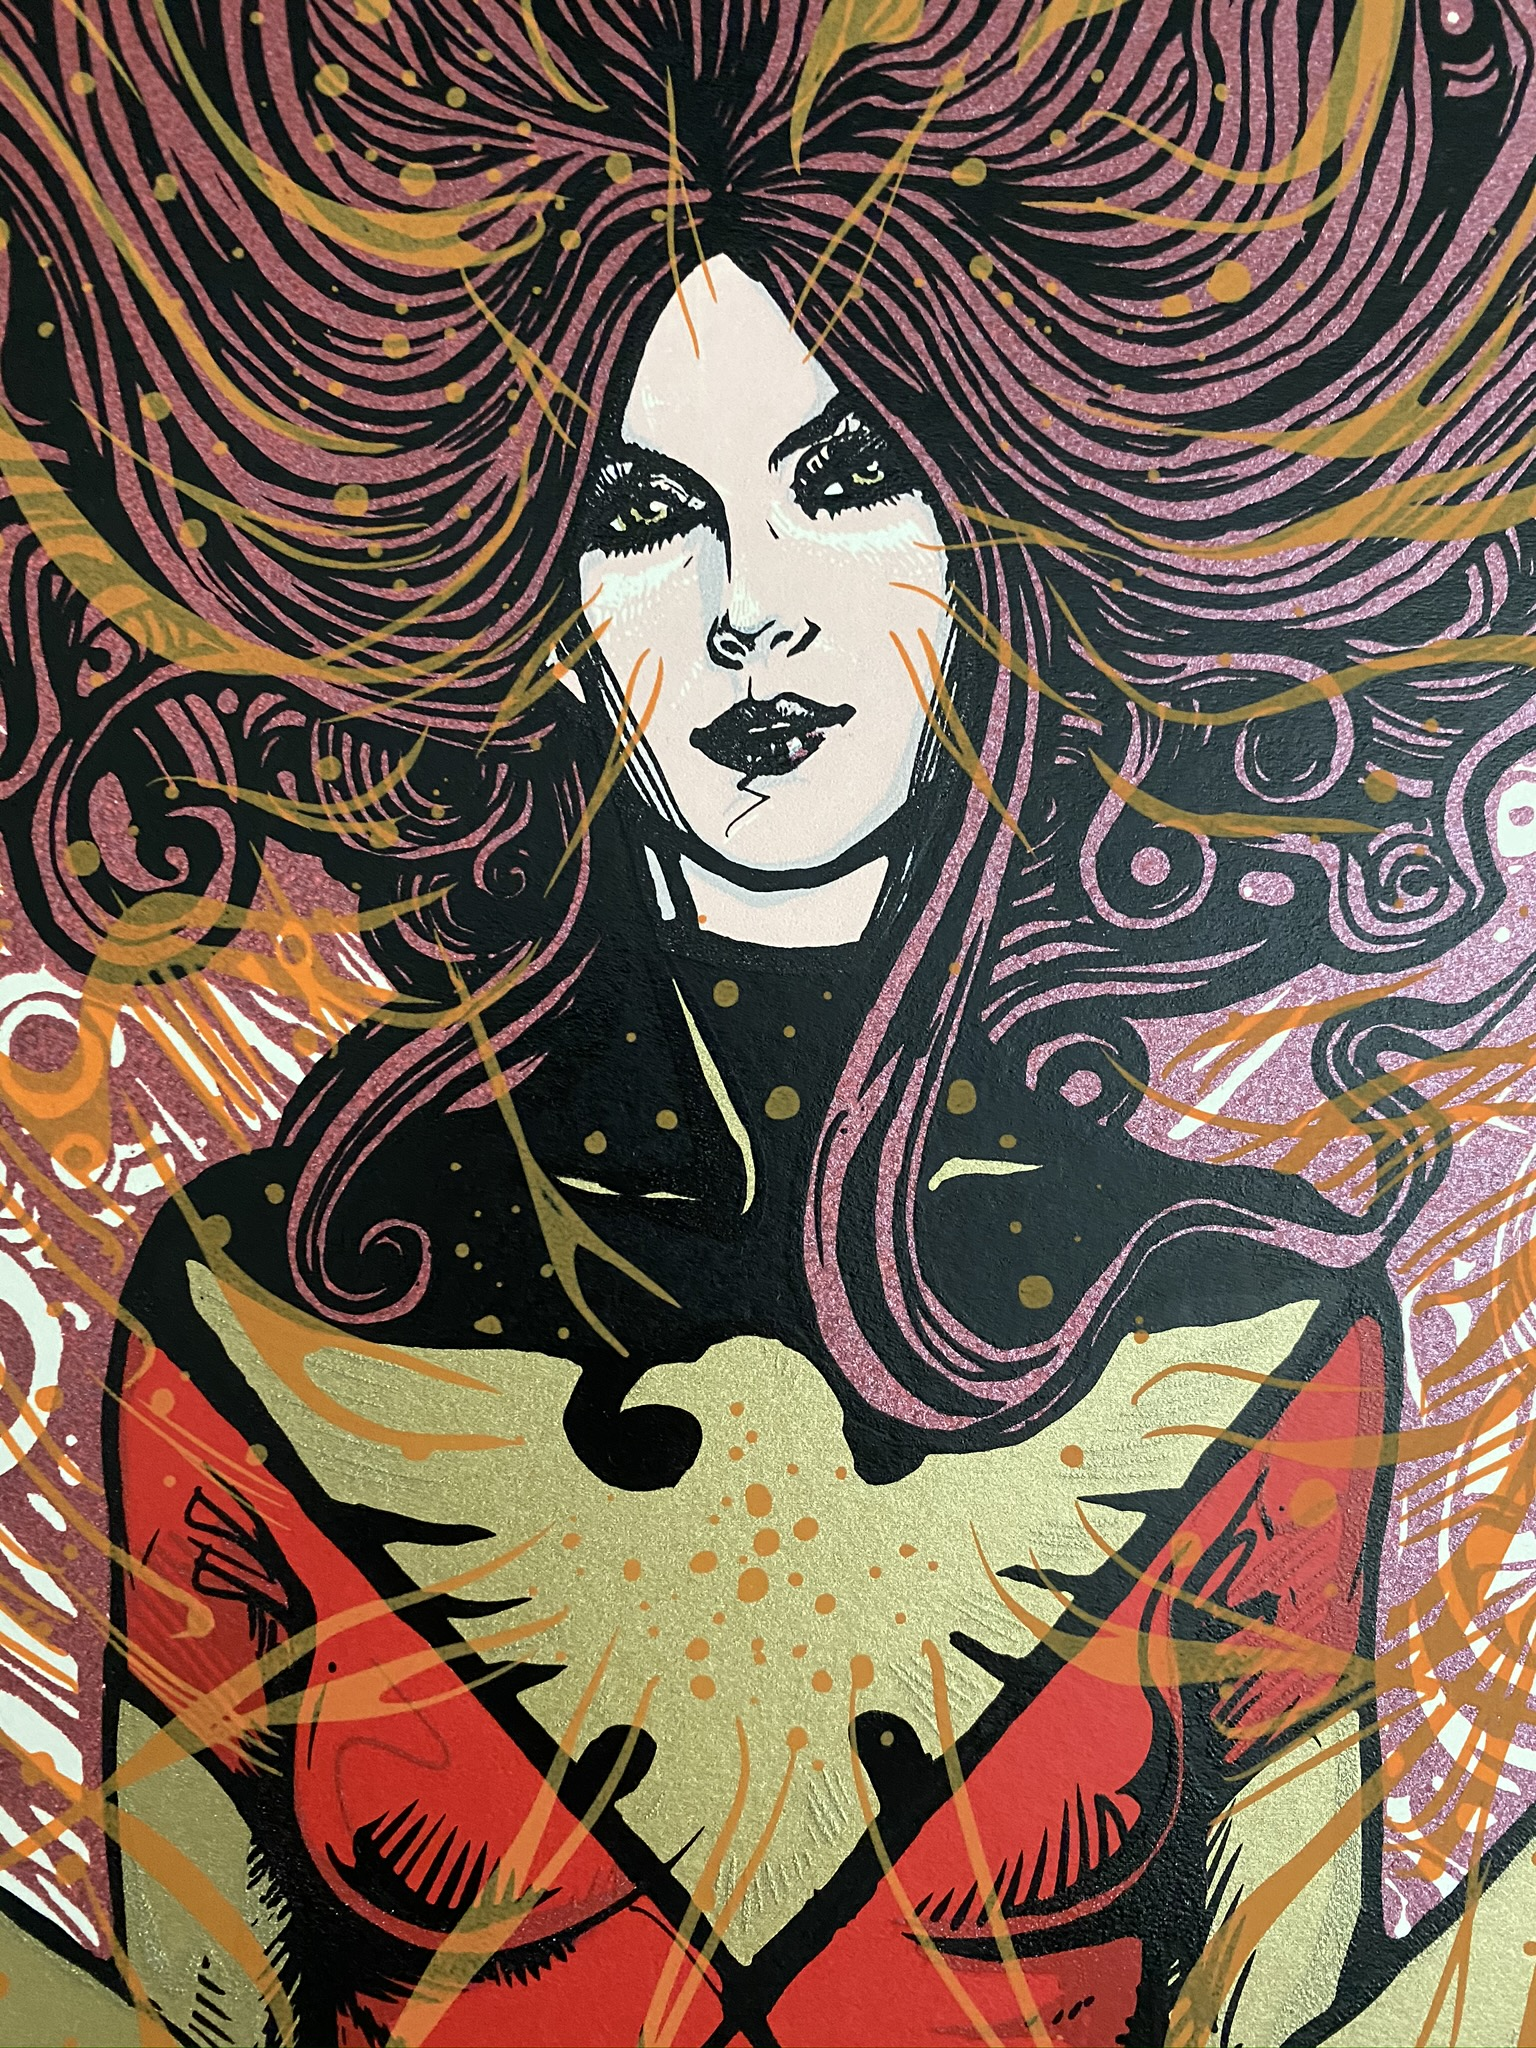 Details for Marvel's Dark Phoenix by Malleus. Limited-edition screenprint poster.